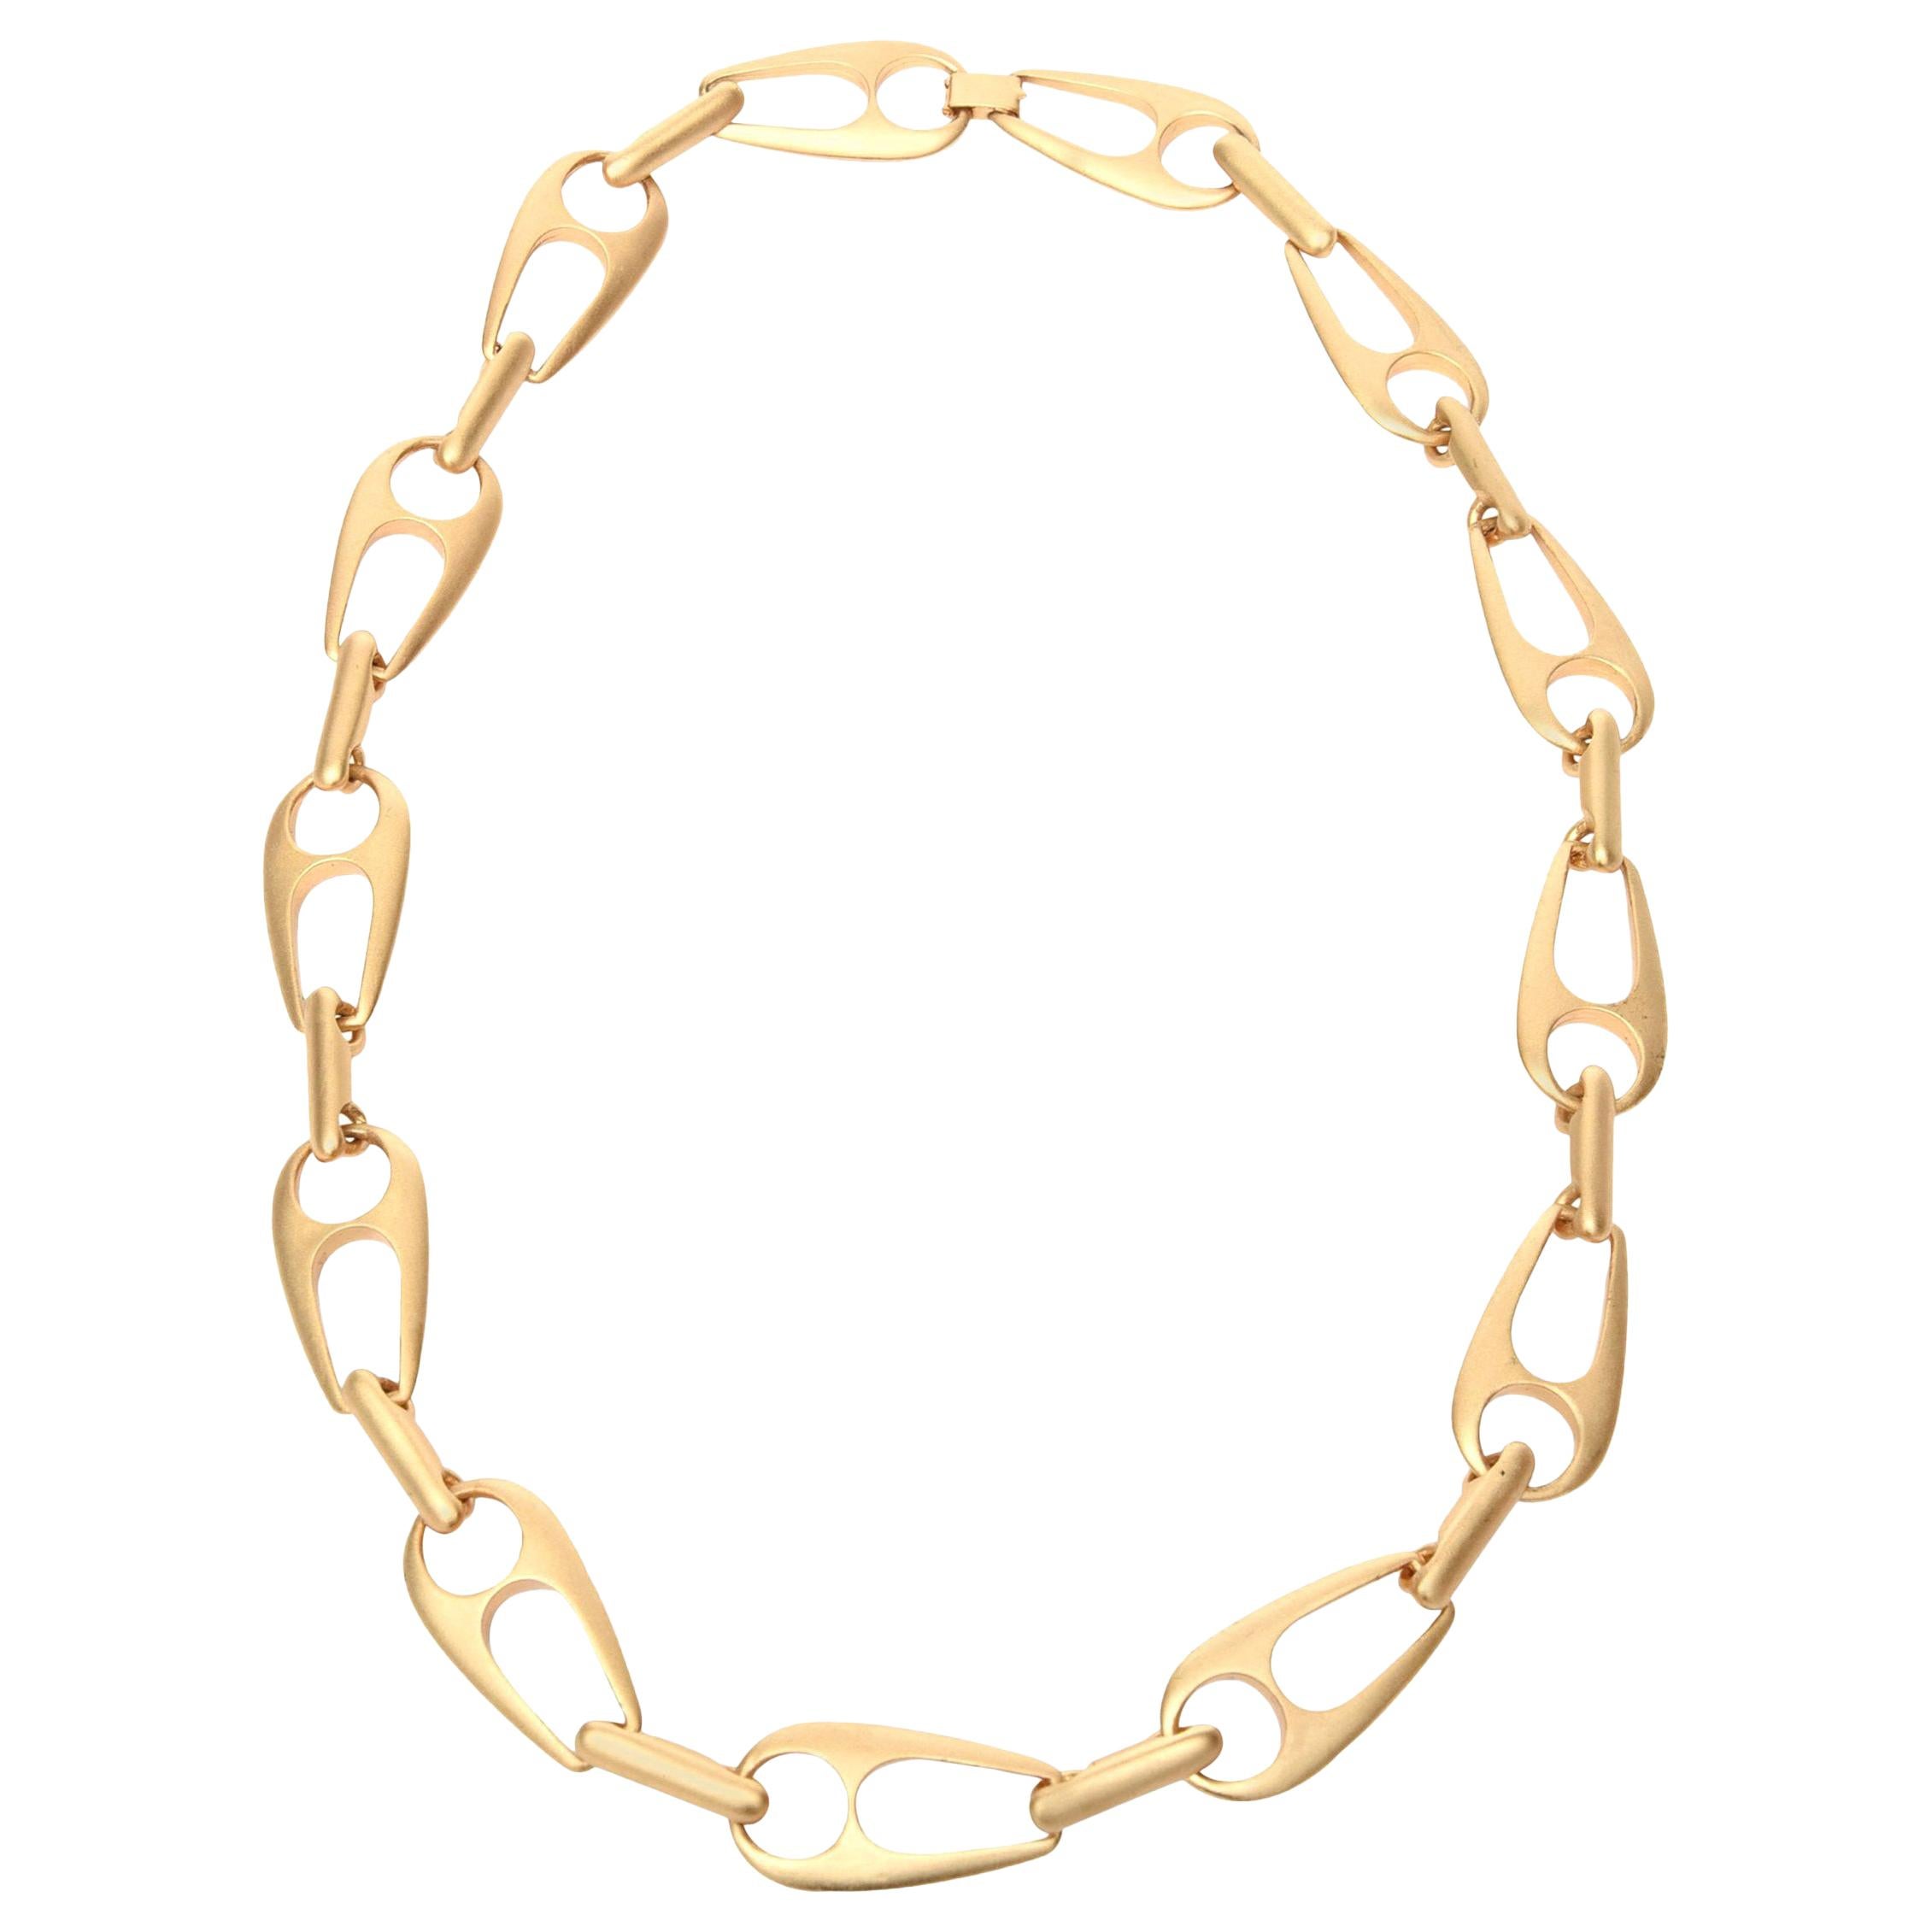  Sculptural Link Necklace Attributed to Alexis Kirk